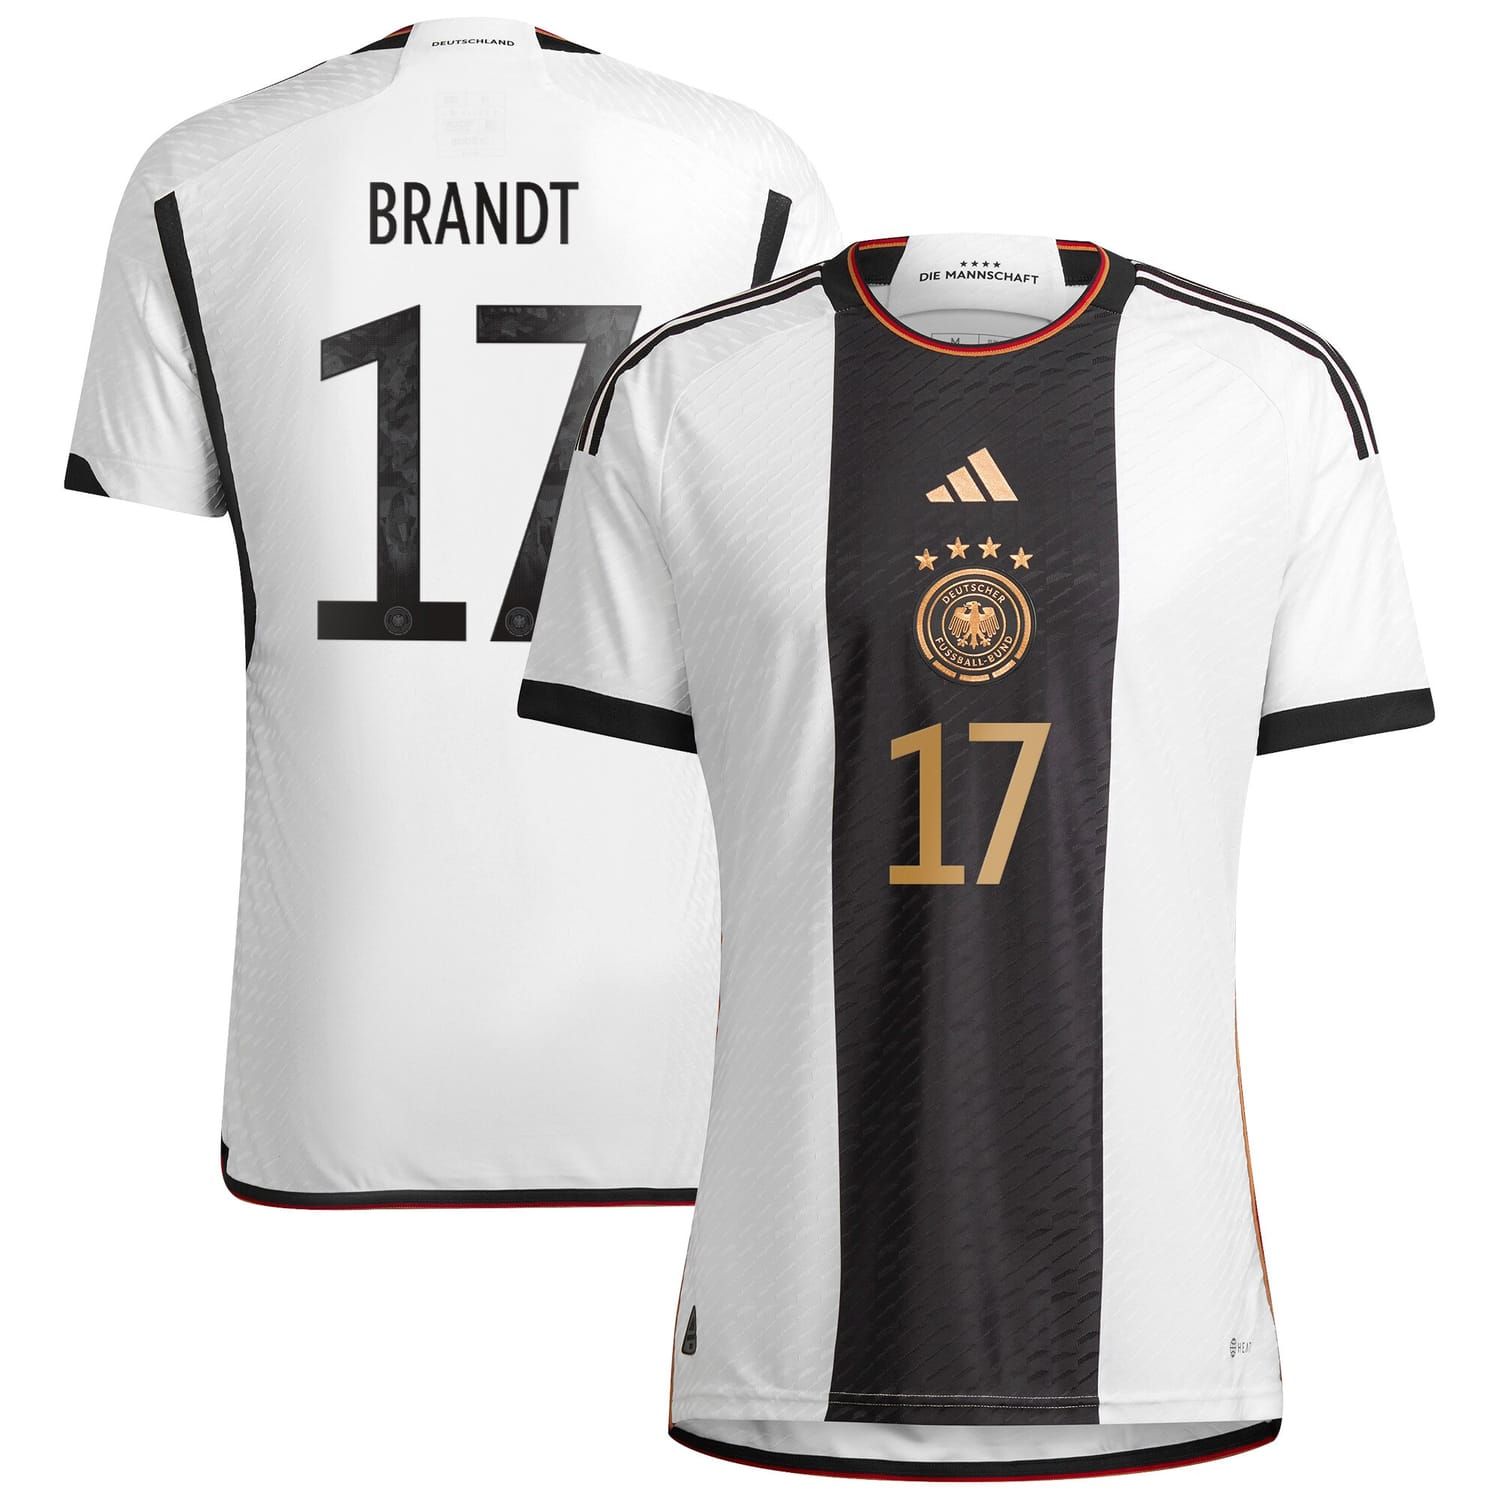 Germany National Team Home Authentic Jersey Shirt 2022 player Julian Brandt 17 printing for Men